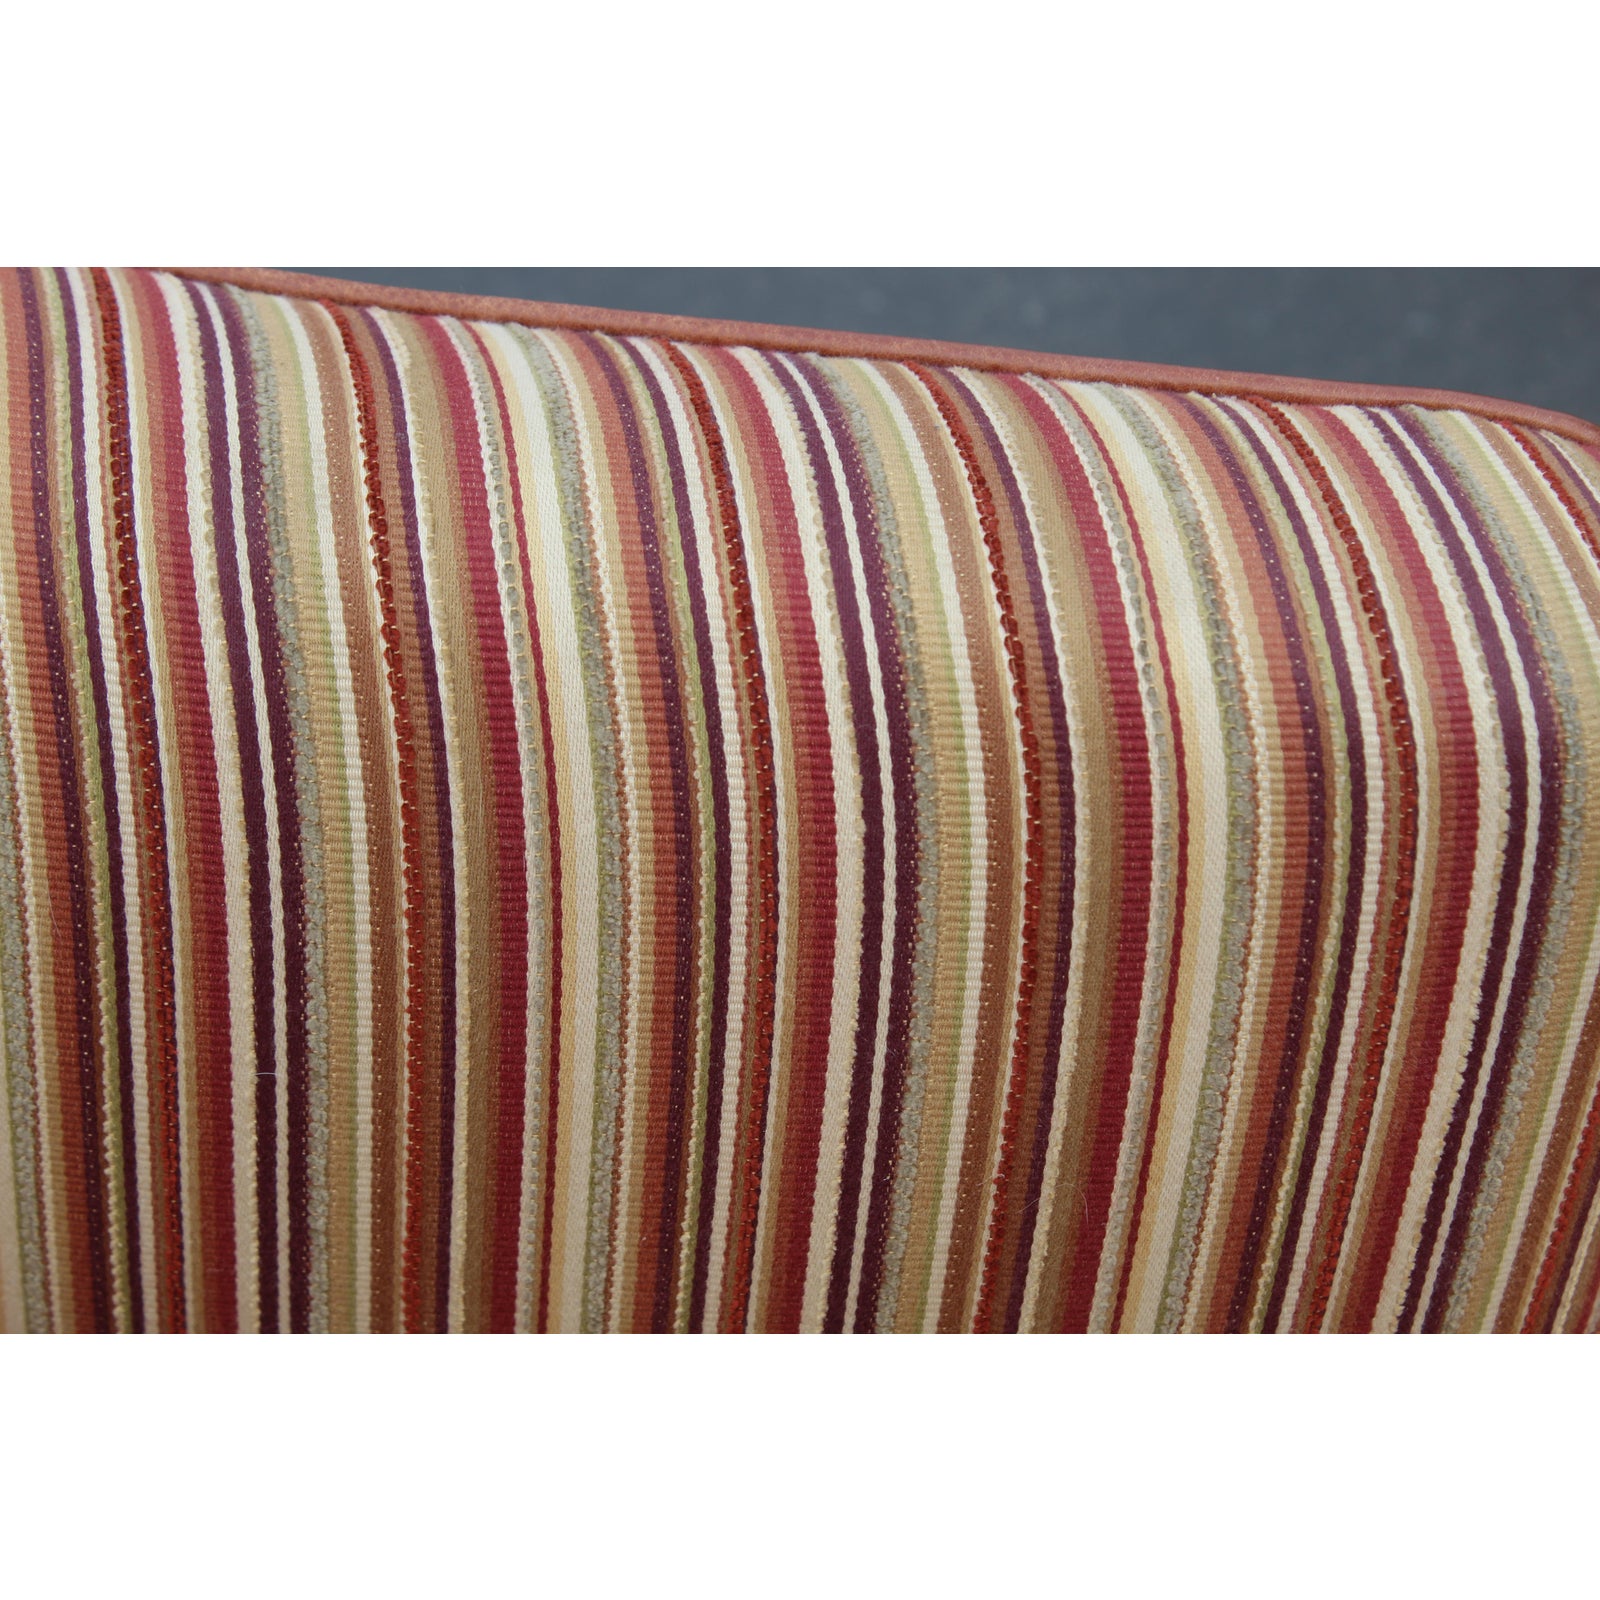 1970s-style-striped-club-chairs-a-pair-1723